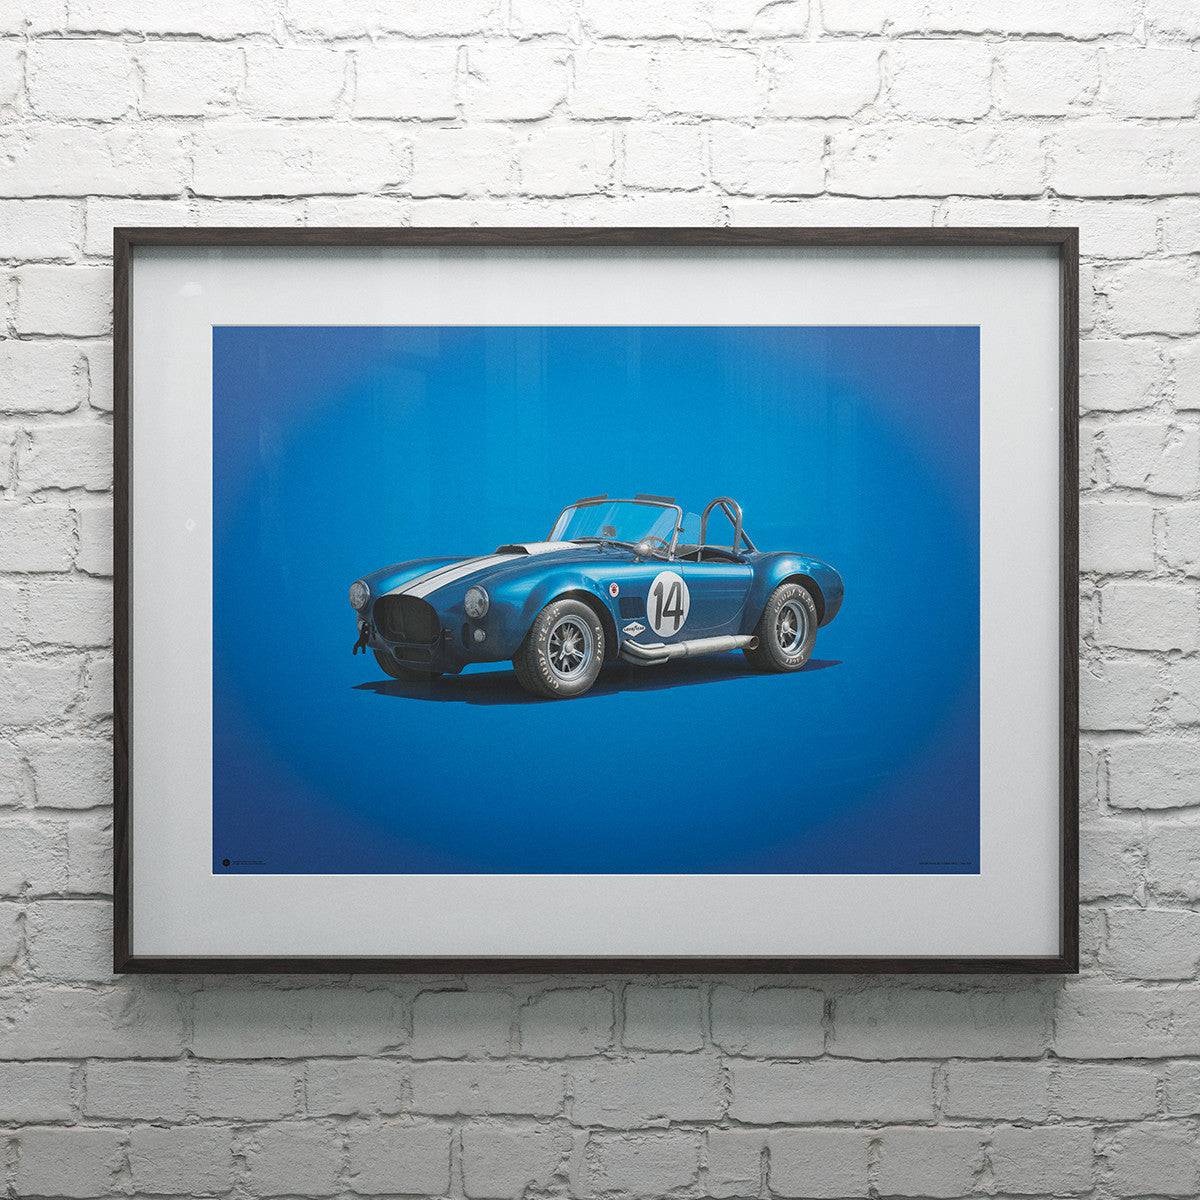 Shelby-Ford AC Cobra Mk III - Blue - 1965 - Colors of Speed Poster